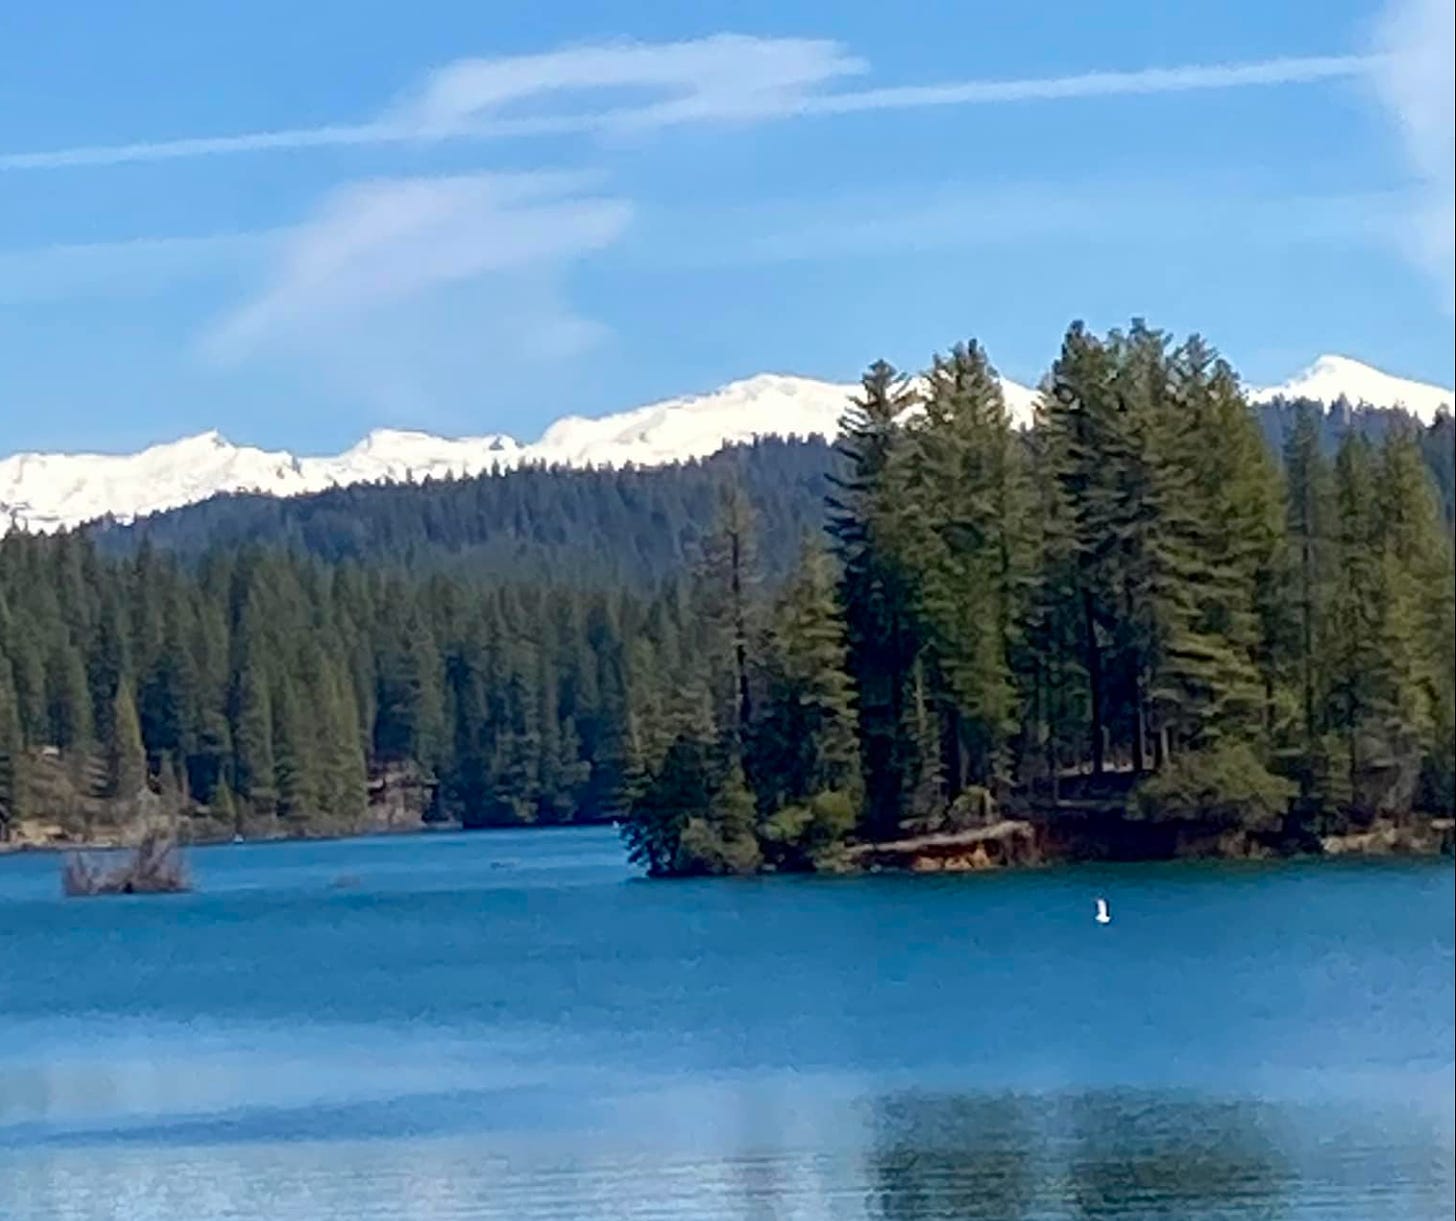 Lake, forest, and snowy mountains